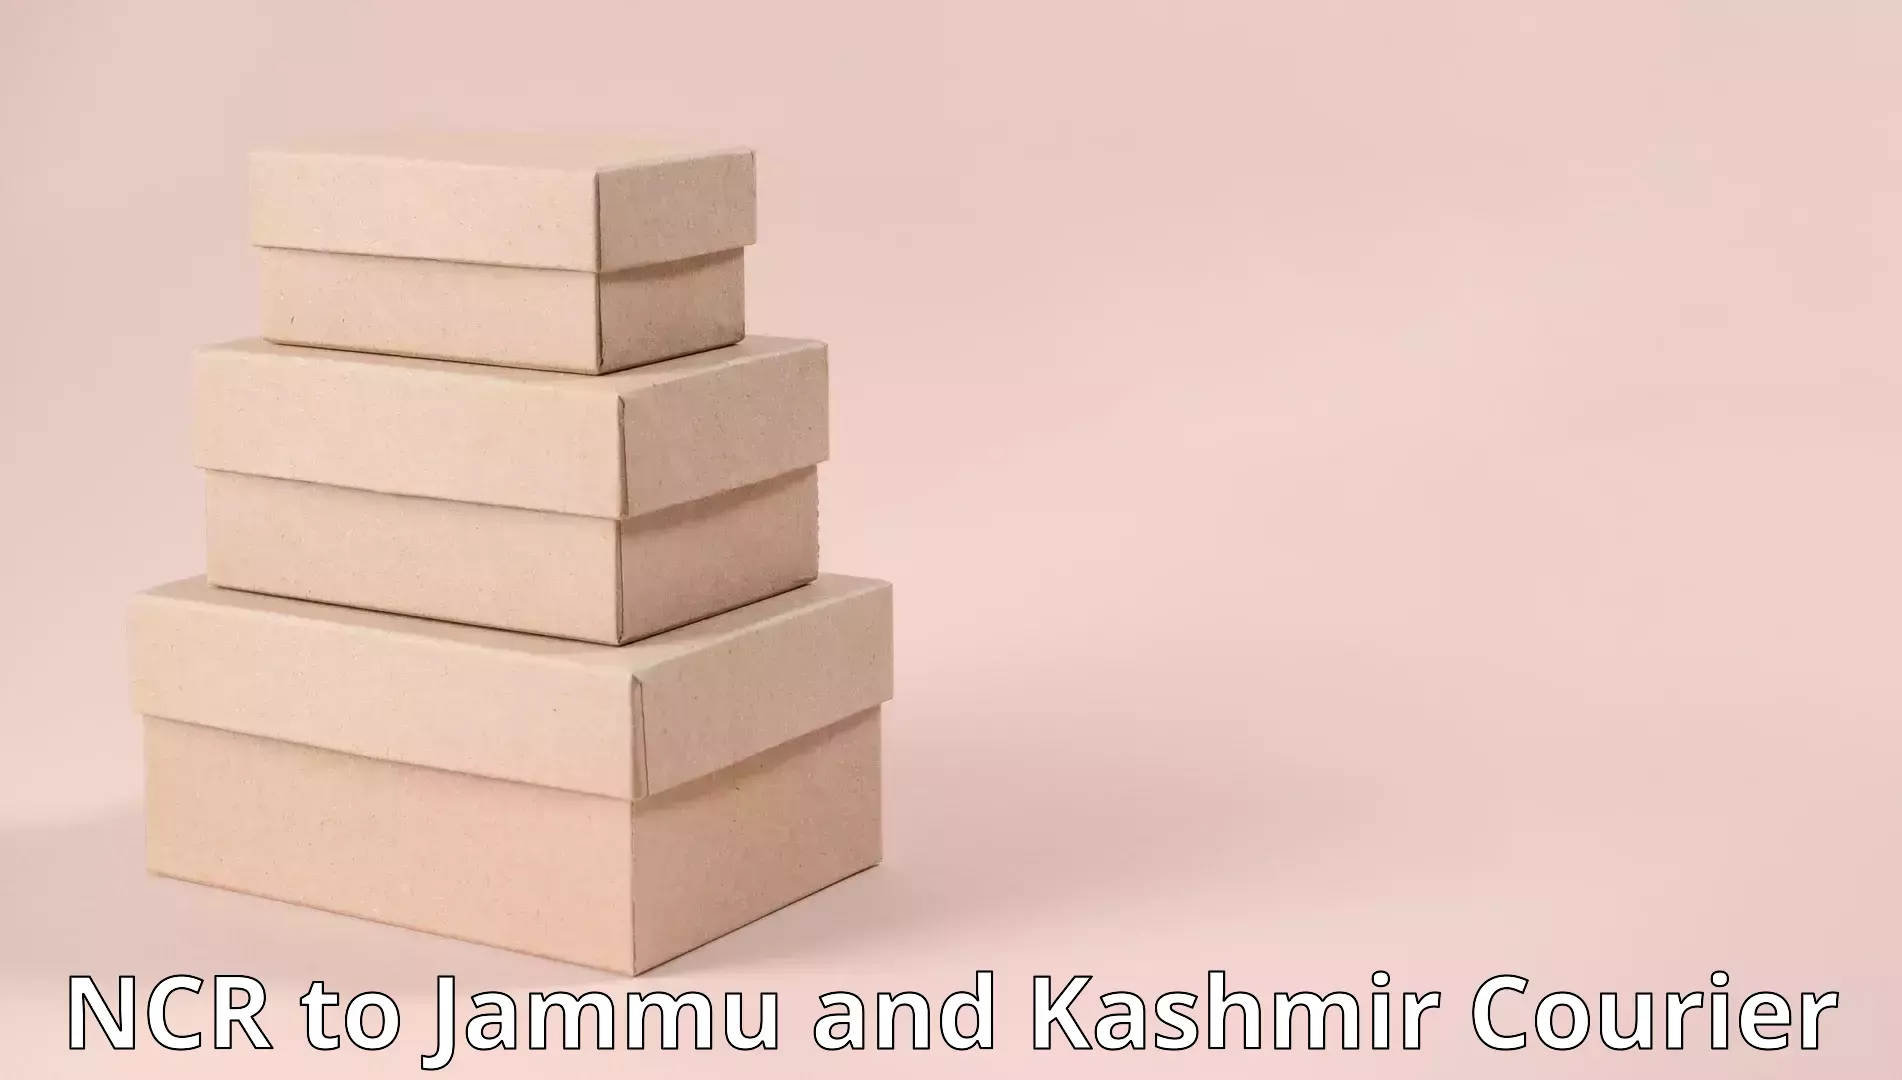 Moving and storage services NCR to University of Jammu